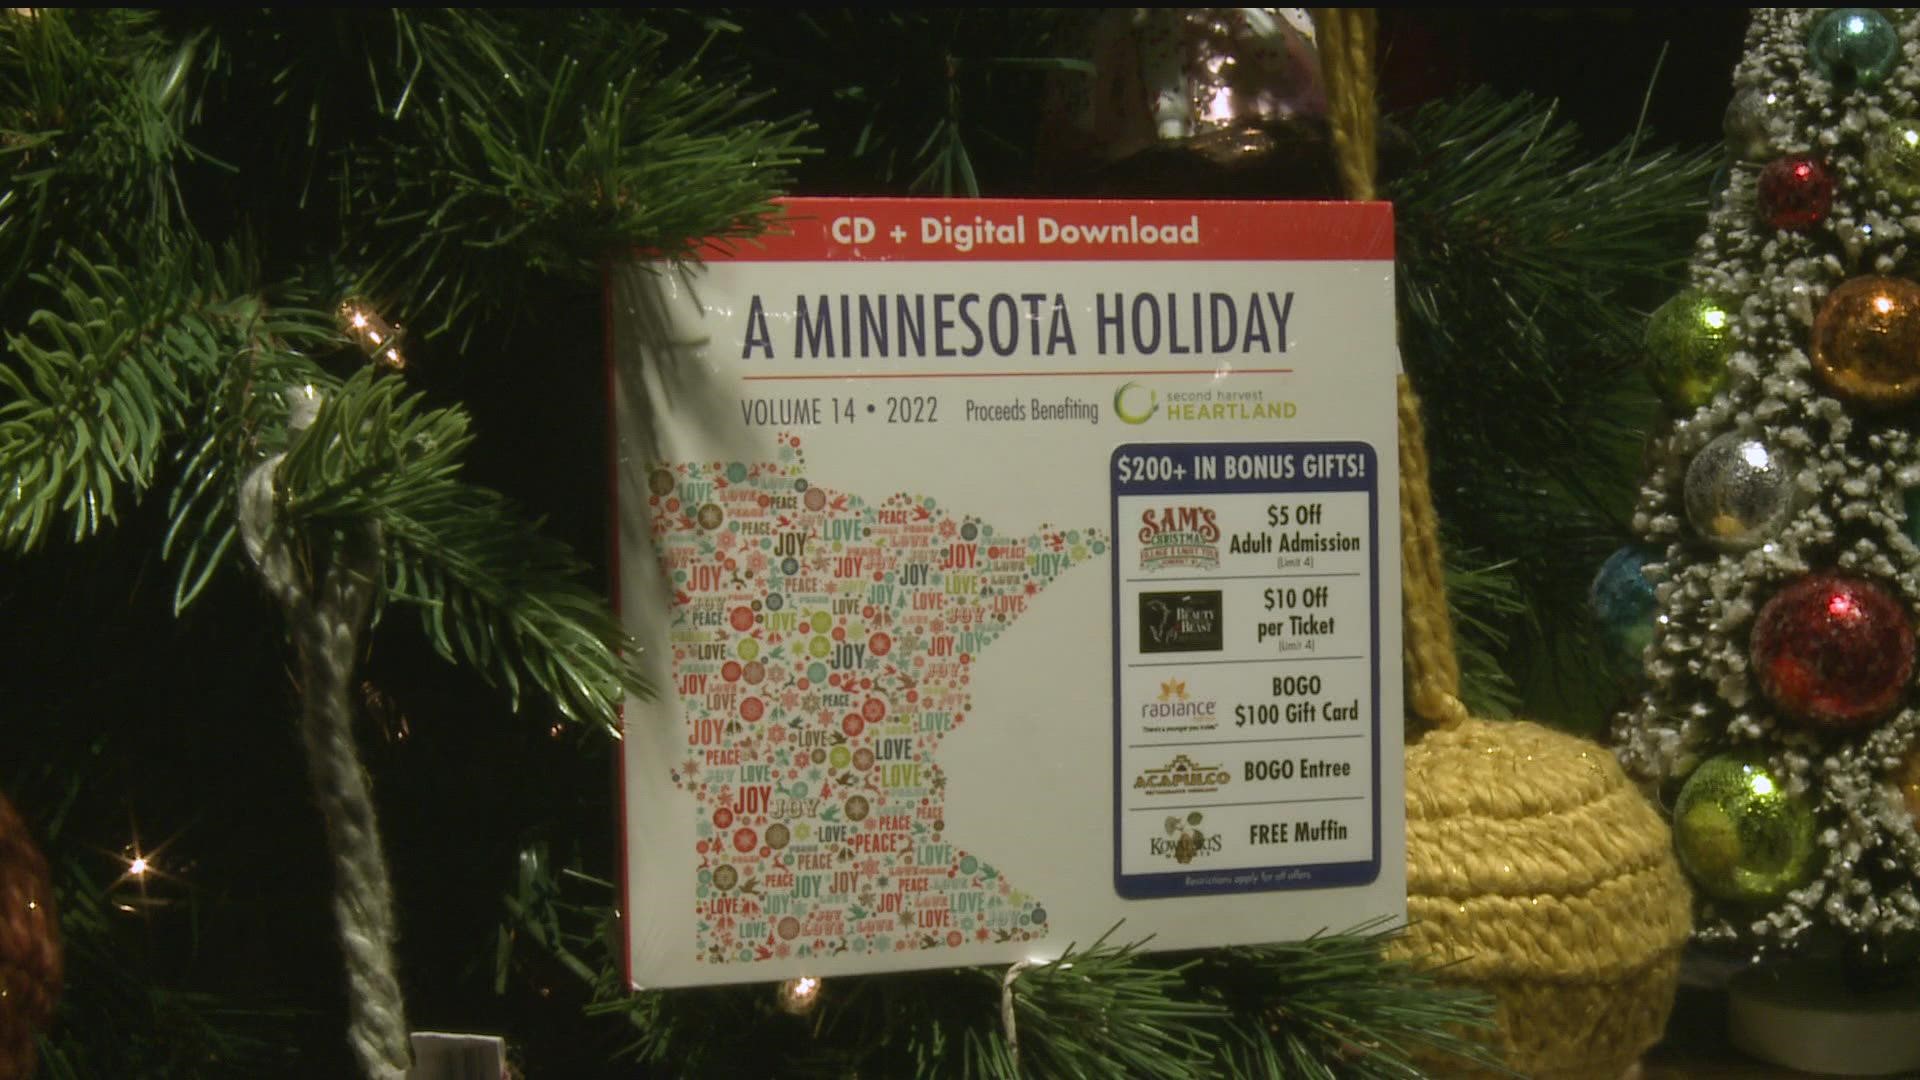 "A Minnesota Holiday" features music from Brian Setzer, Kat Perkins, Chris Koza, Sounds of Blackness, and many more local artists.